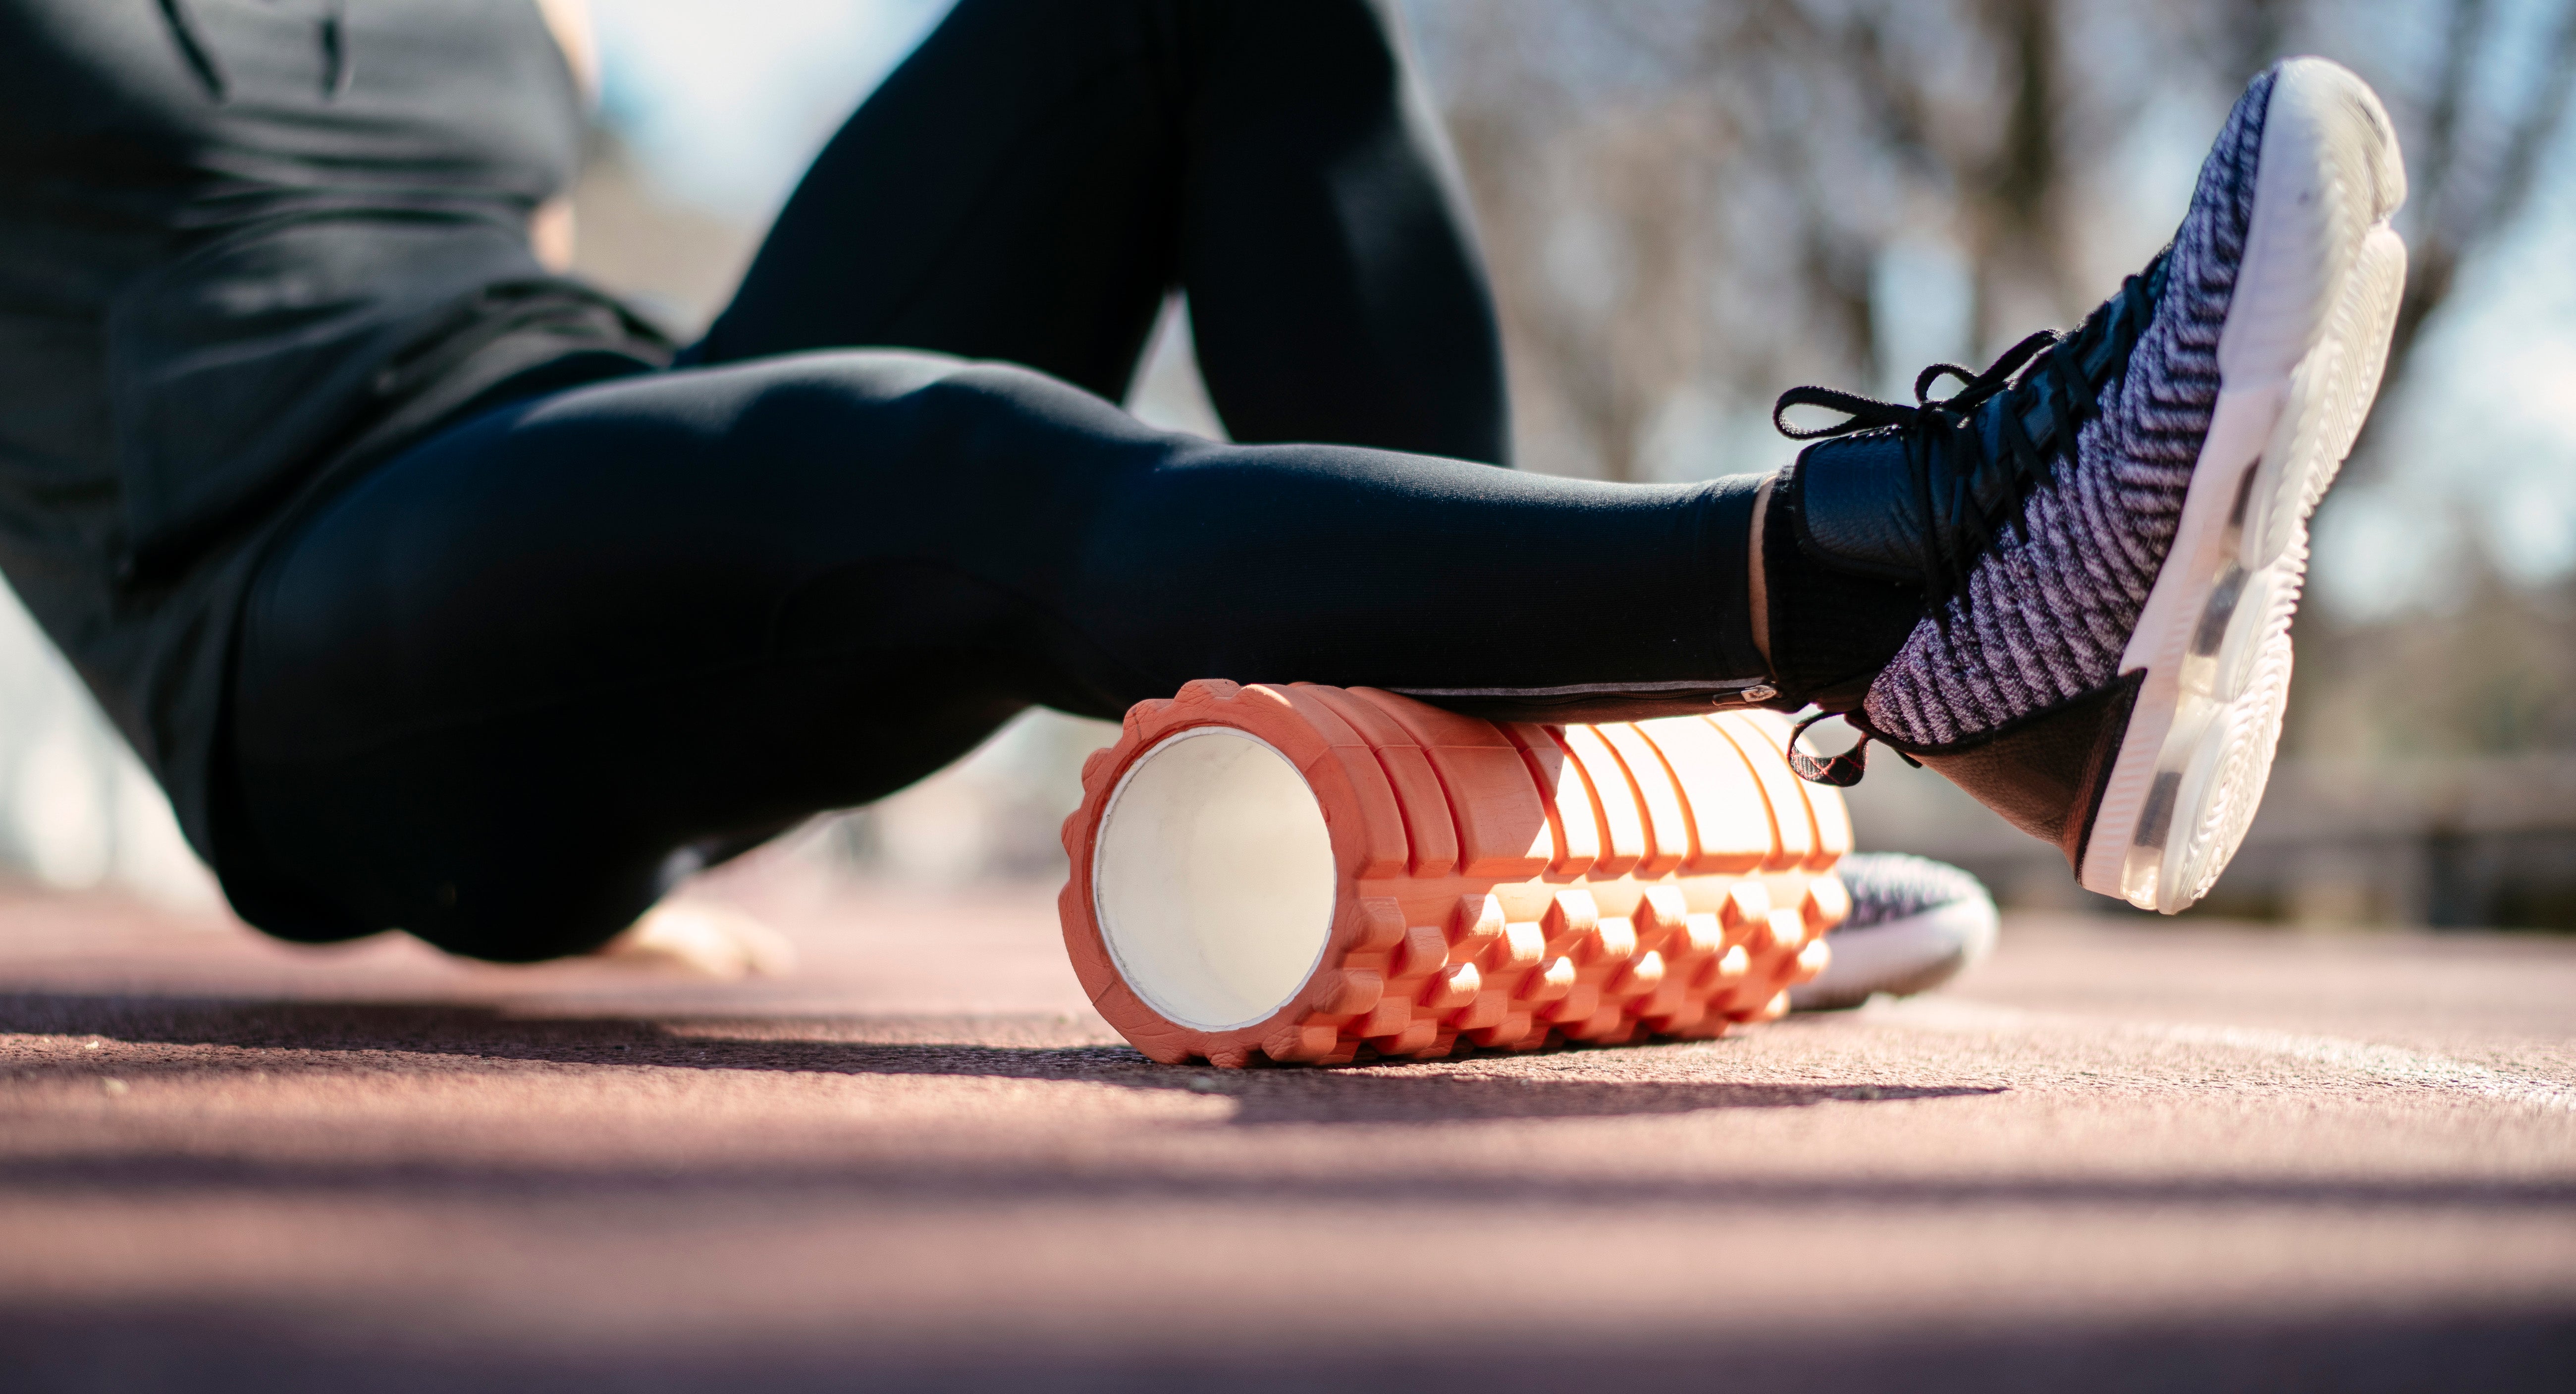 How to Use Self Myofascial Release for 5 Key Areas of Your Body